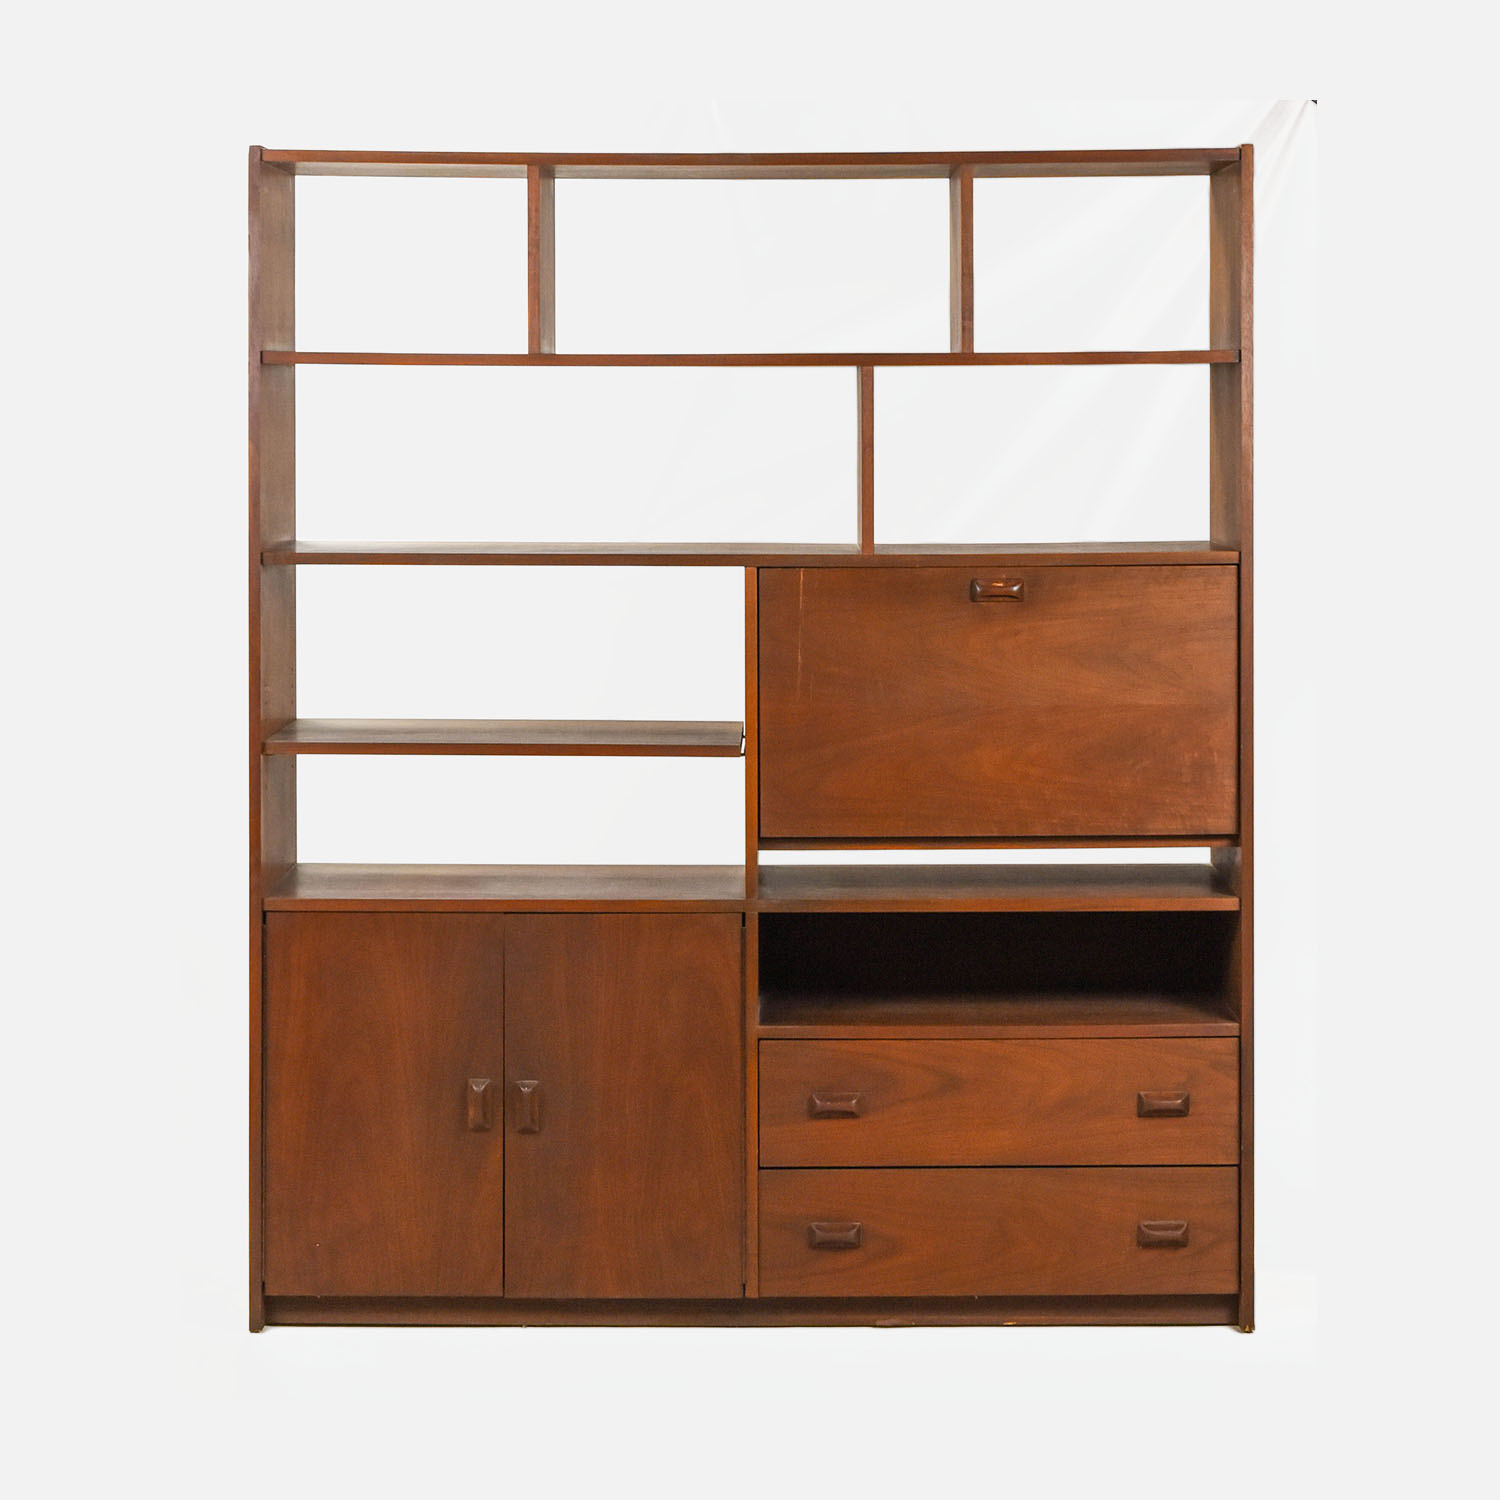 1960s Walnut Room Divider Bookcase with Desk MCM Wall Unit